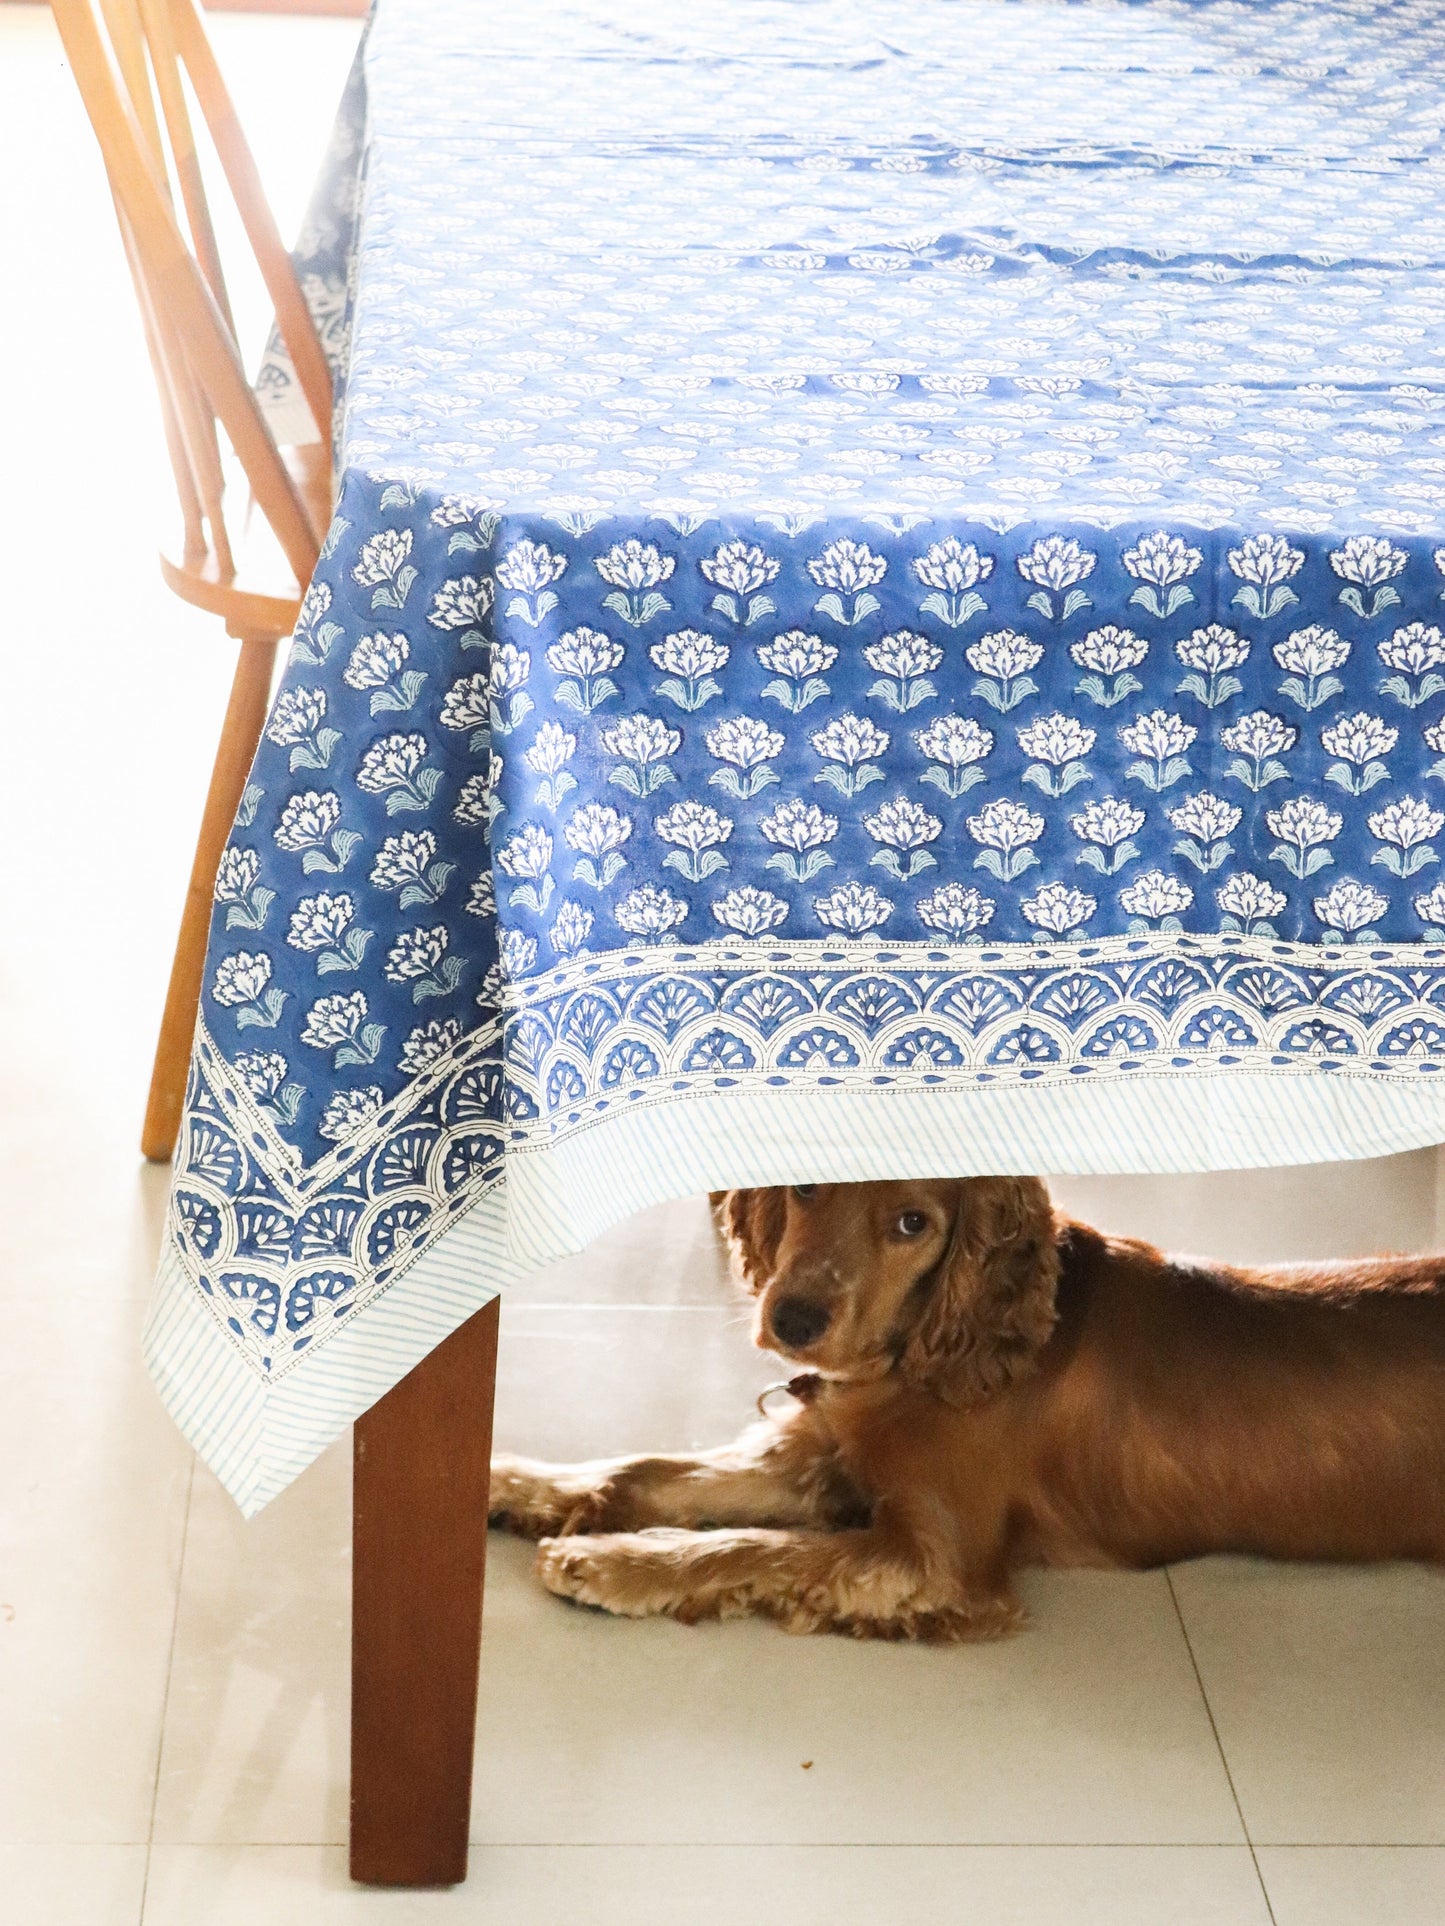 Blue boota tablecloth - 6 to 8 seater block print table cloth - Navy blue table cover - large table size tablecloth - 60x100 inches